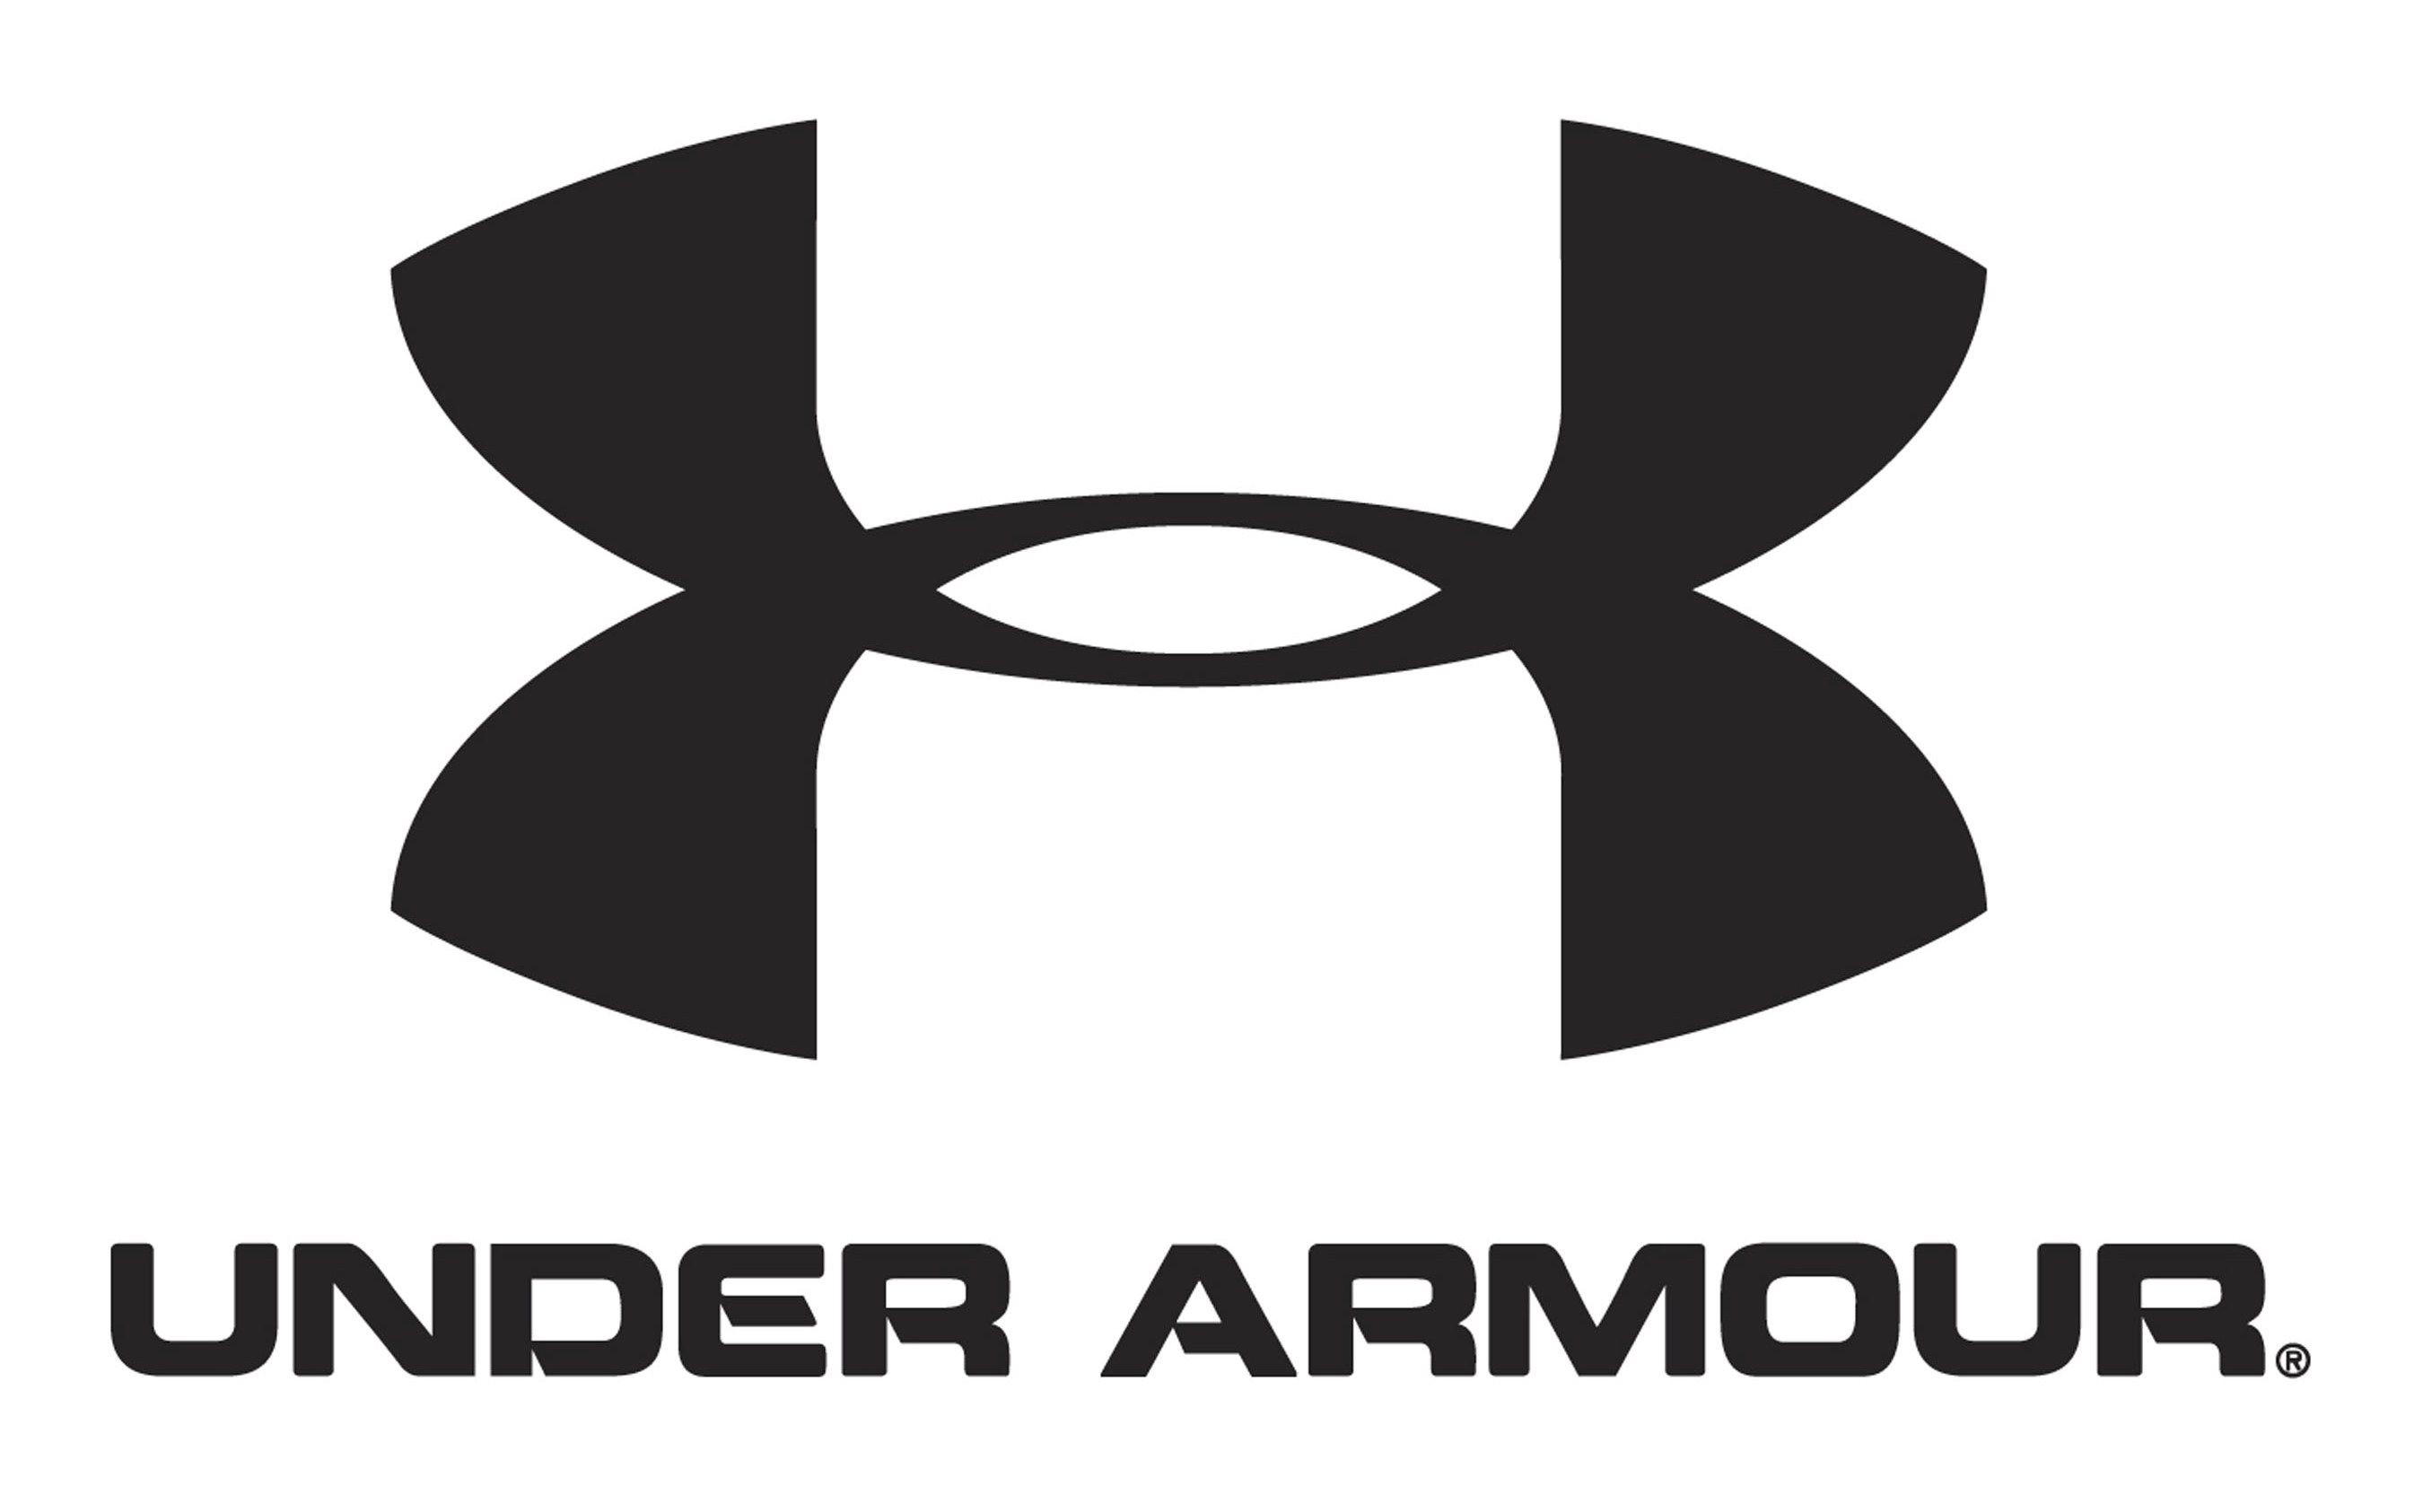 2700x1685 Under Armour Wallpapers 2015 - Wallpaper Cave